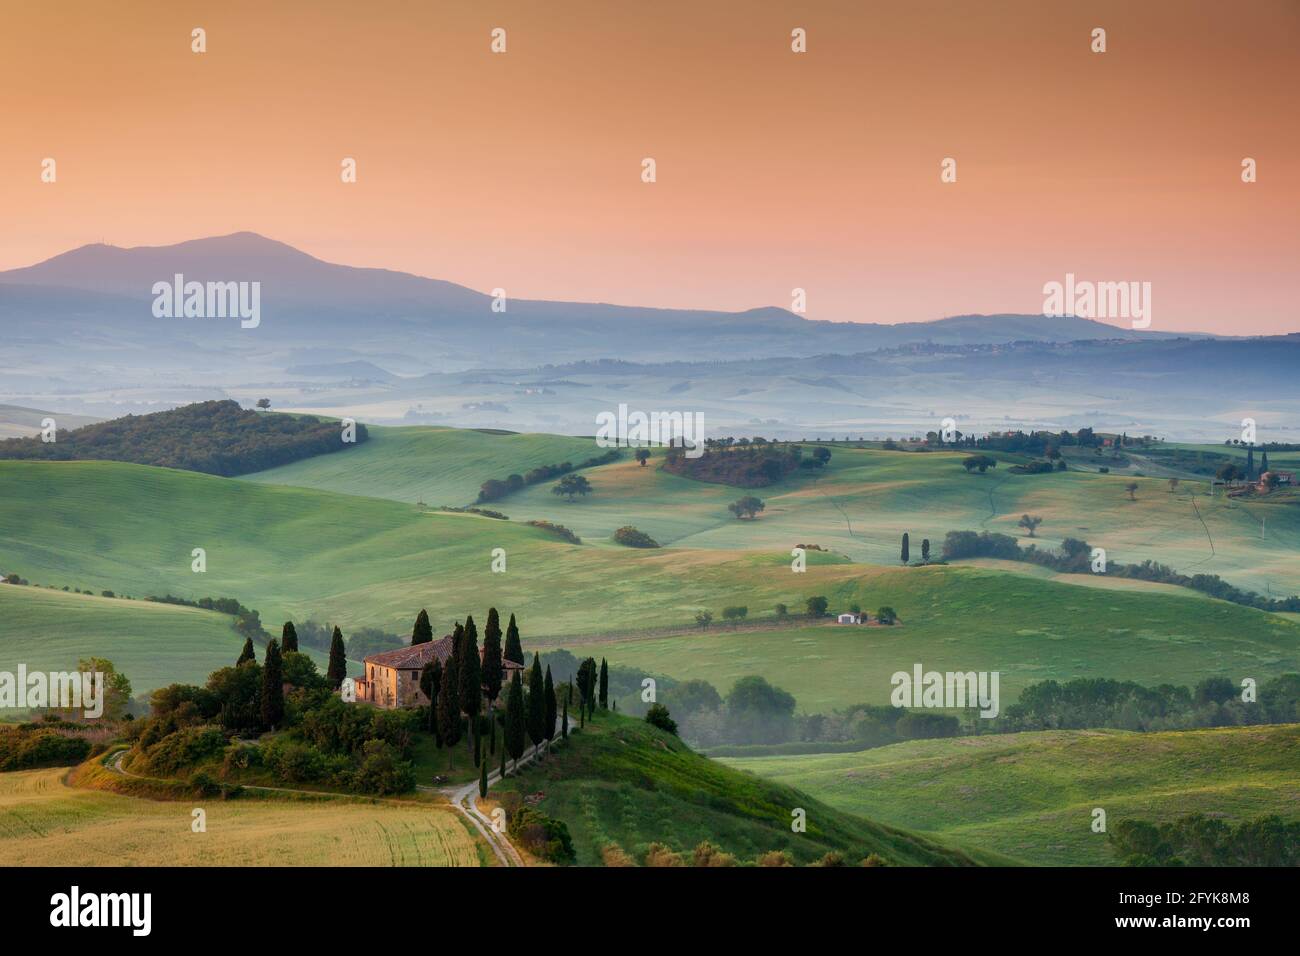 The iconic Belverdere farmhouse bathed in early morning light is one of the finest sights to experience in the Val d'Orcia valley, Tuscany. Stock Photo